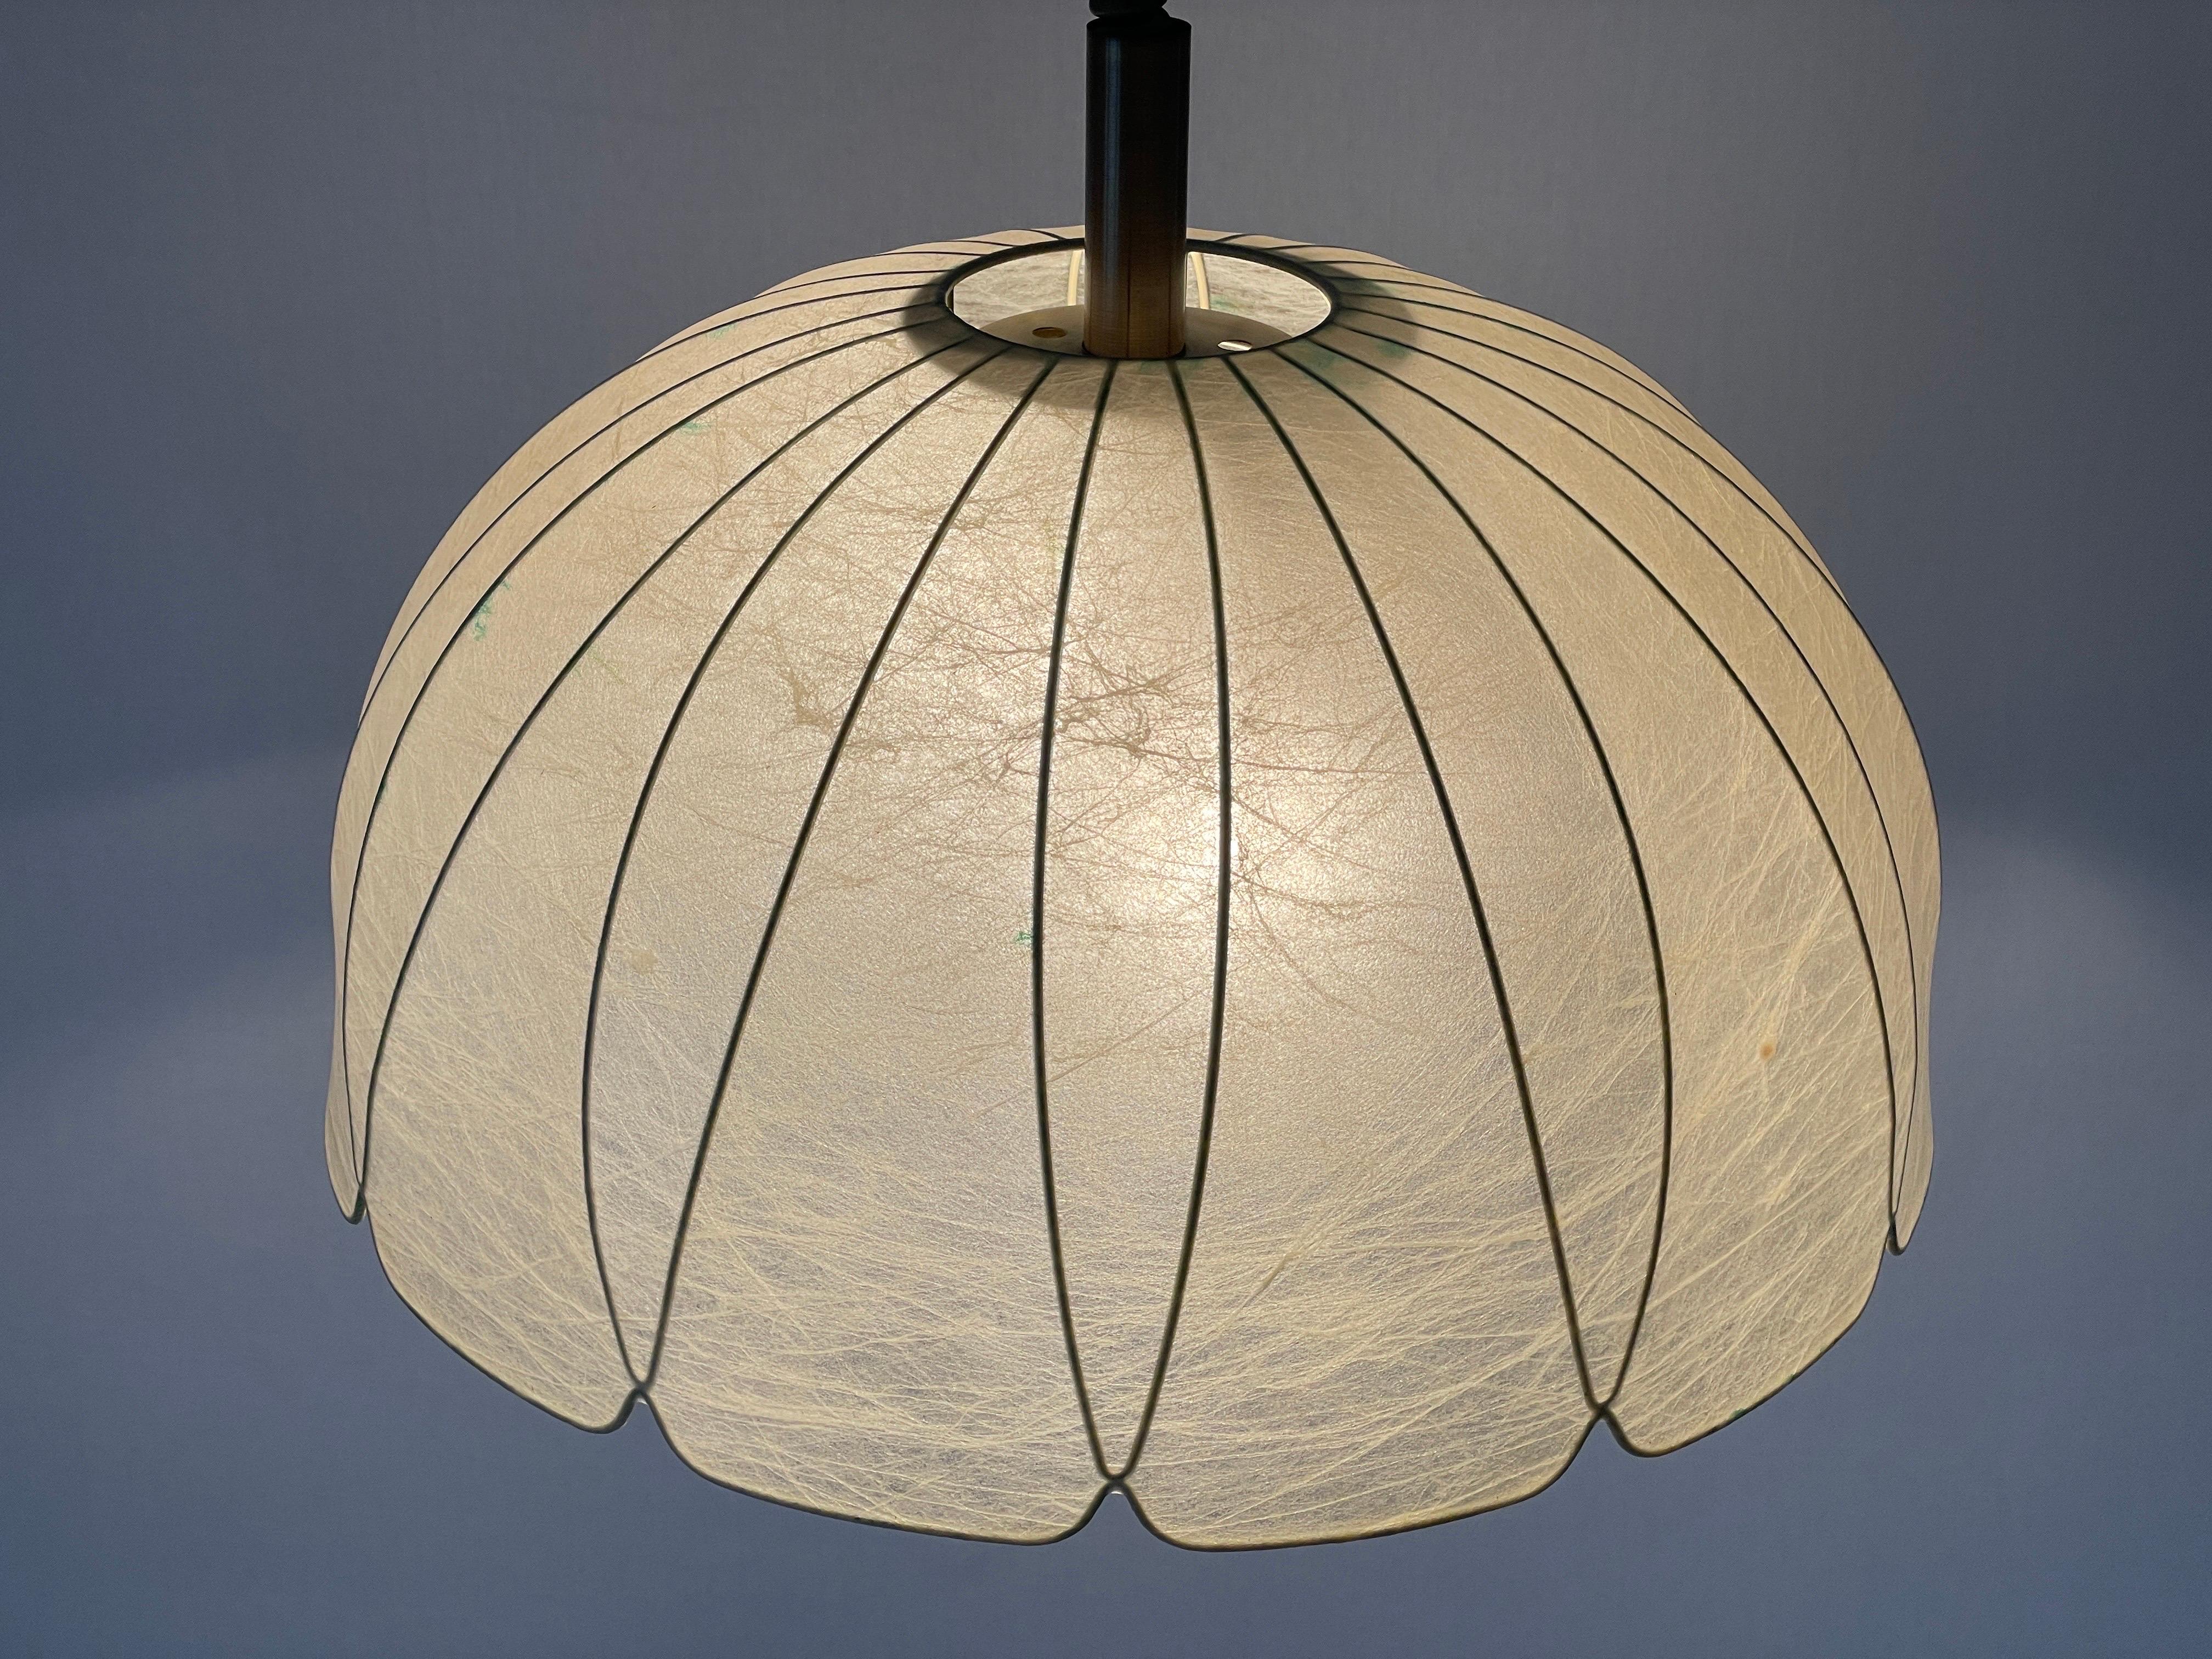 Flower Design Cocoon Adjustable Height Pendant Lamp by Goldkant, 1960s, Germany For Sale 7